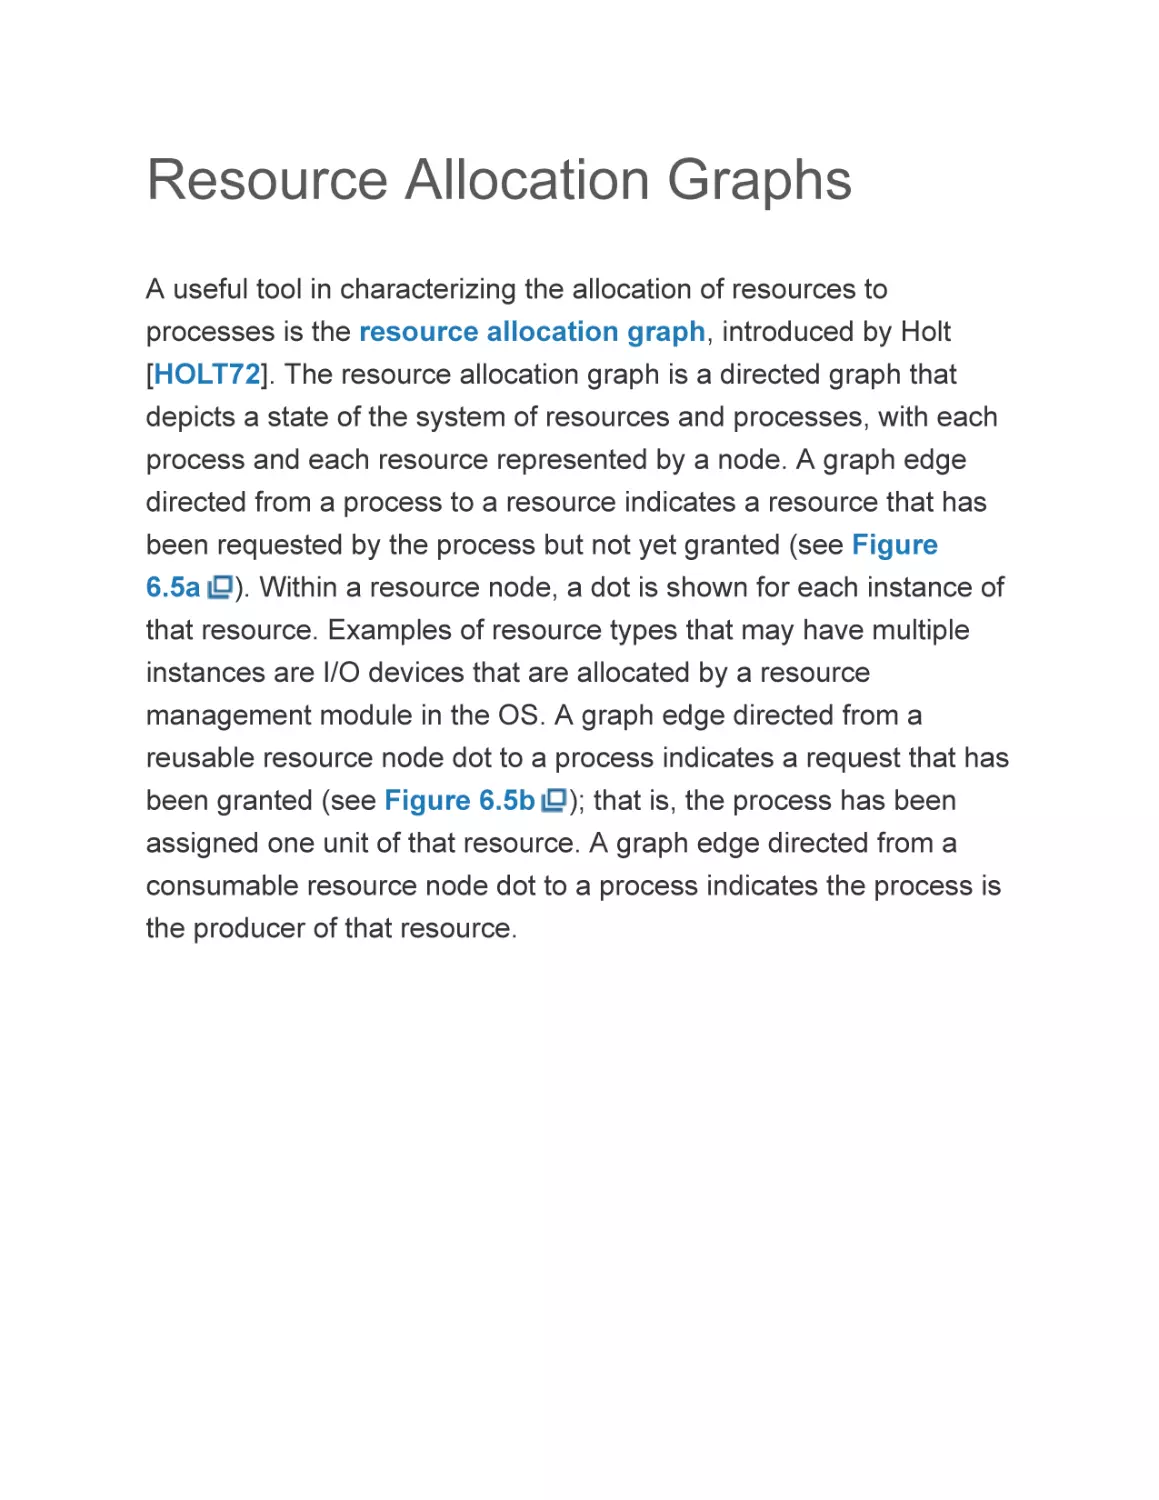 Resource Allocation Graphs